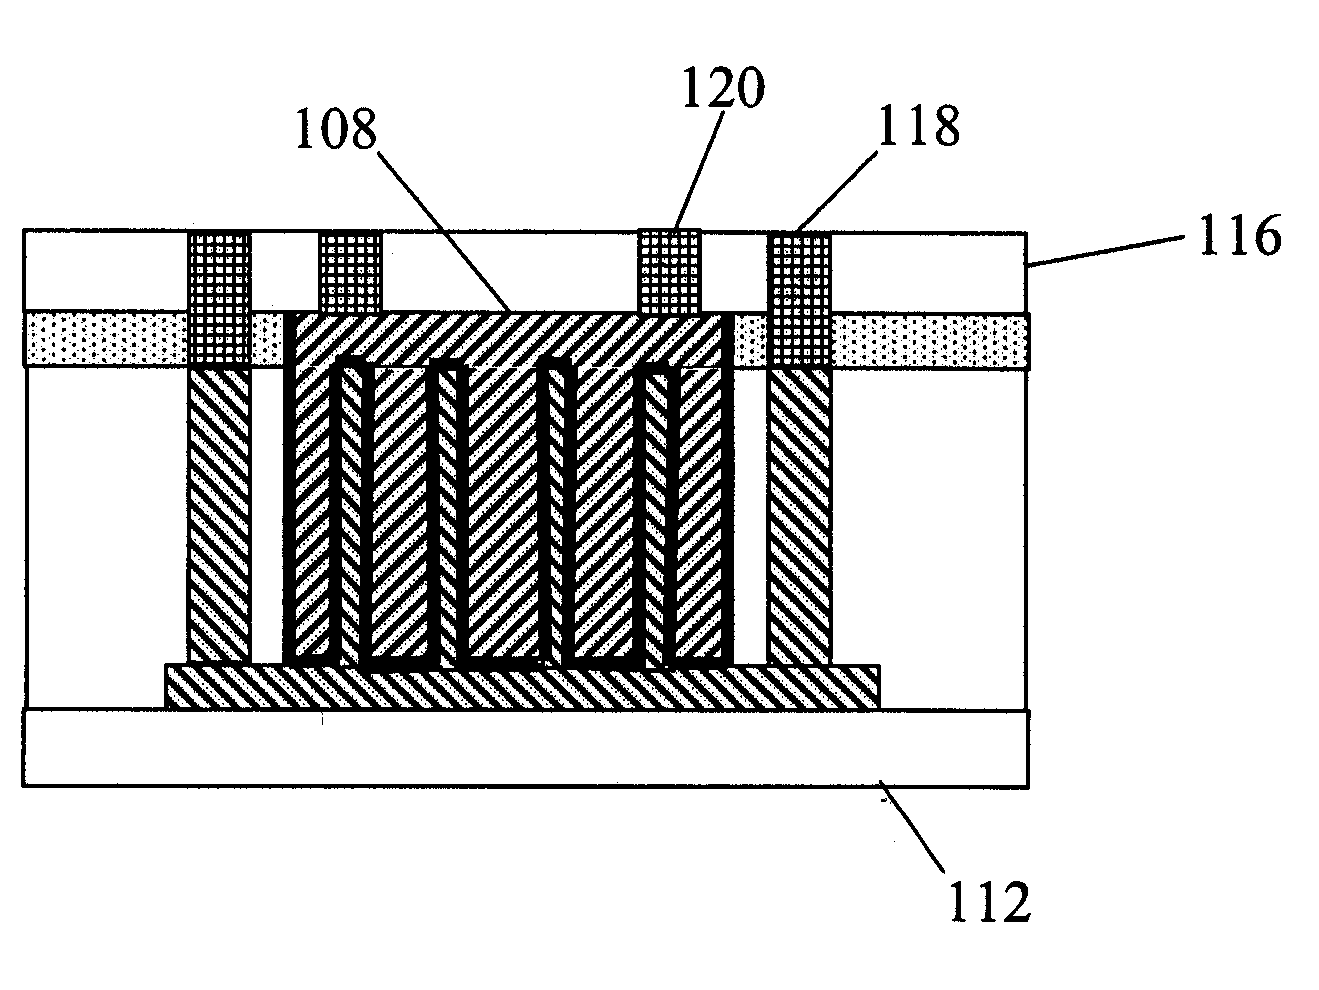 High density mimcap with a unit repeatable structure